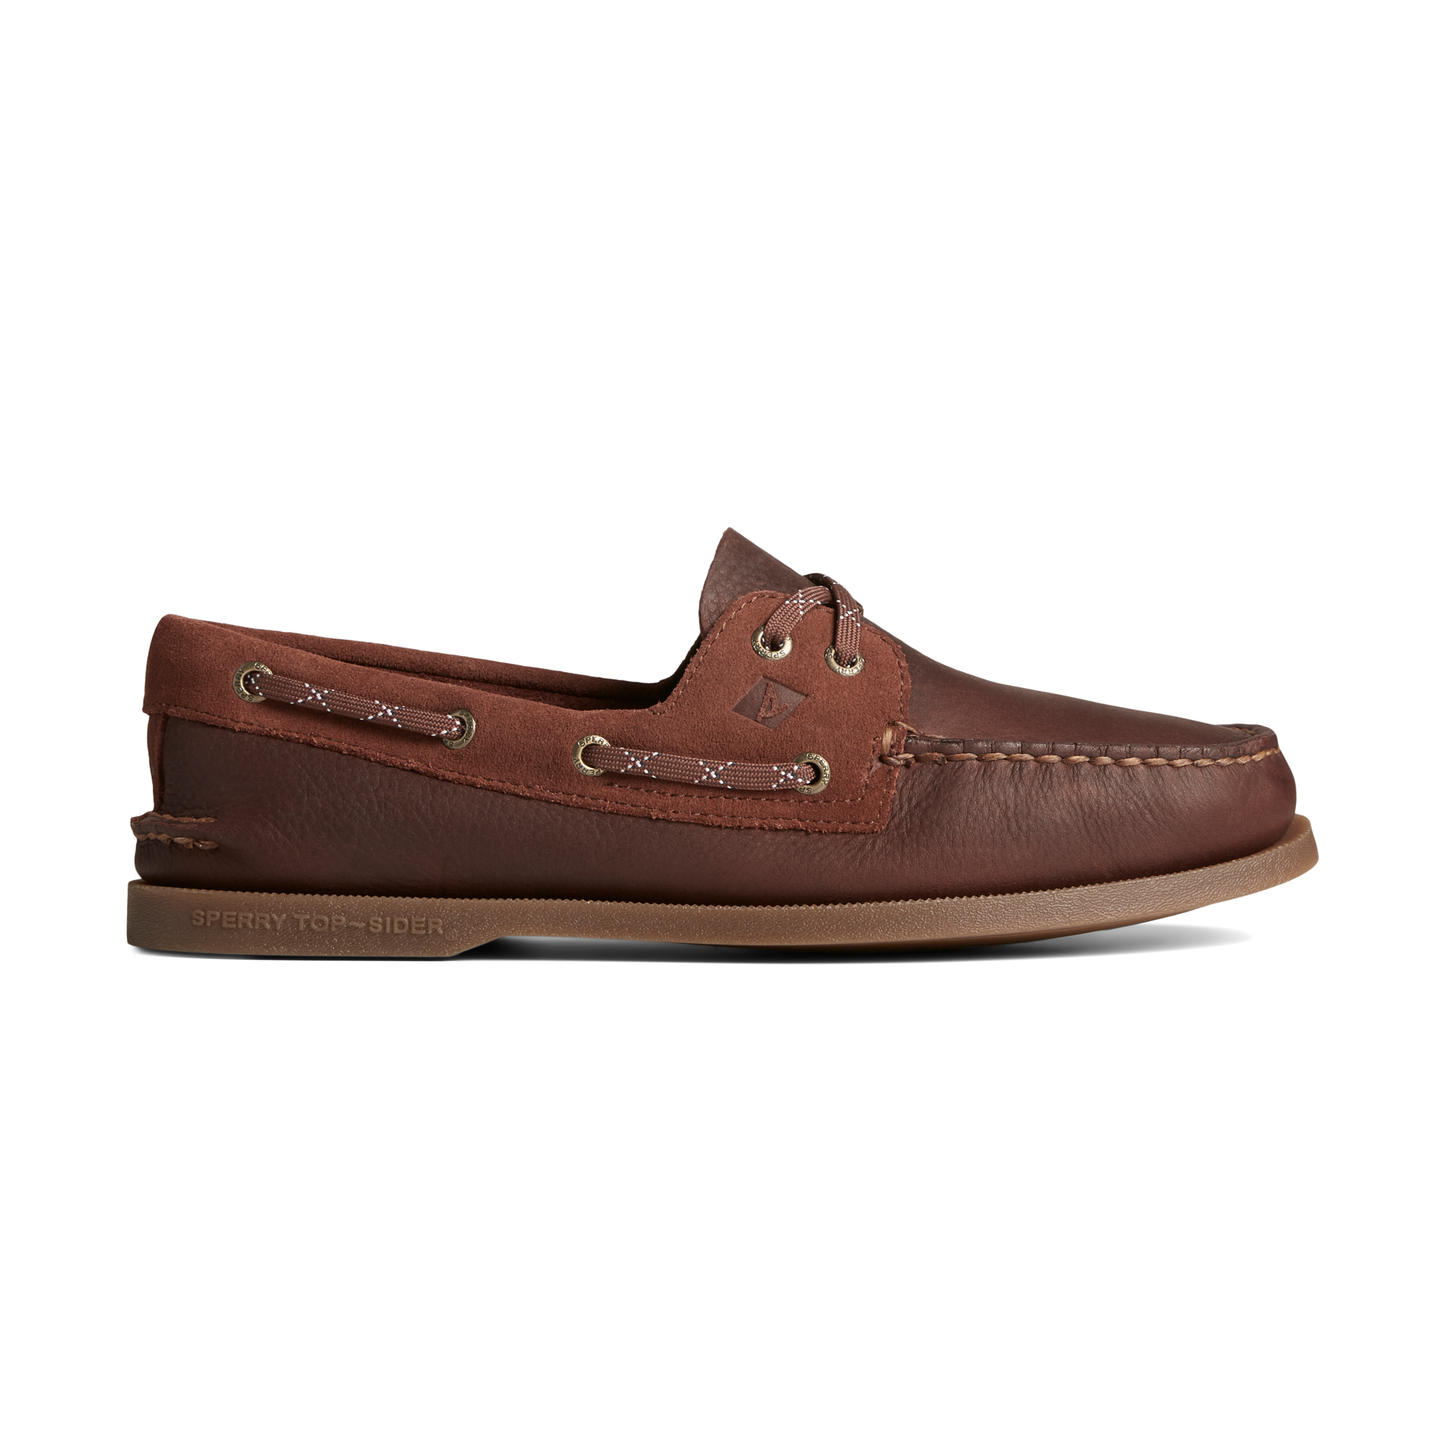 A/O 2-EYE TUMBLED/SUEDE HOMBRE STS24531